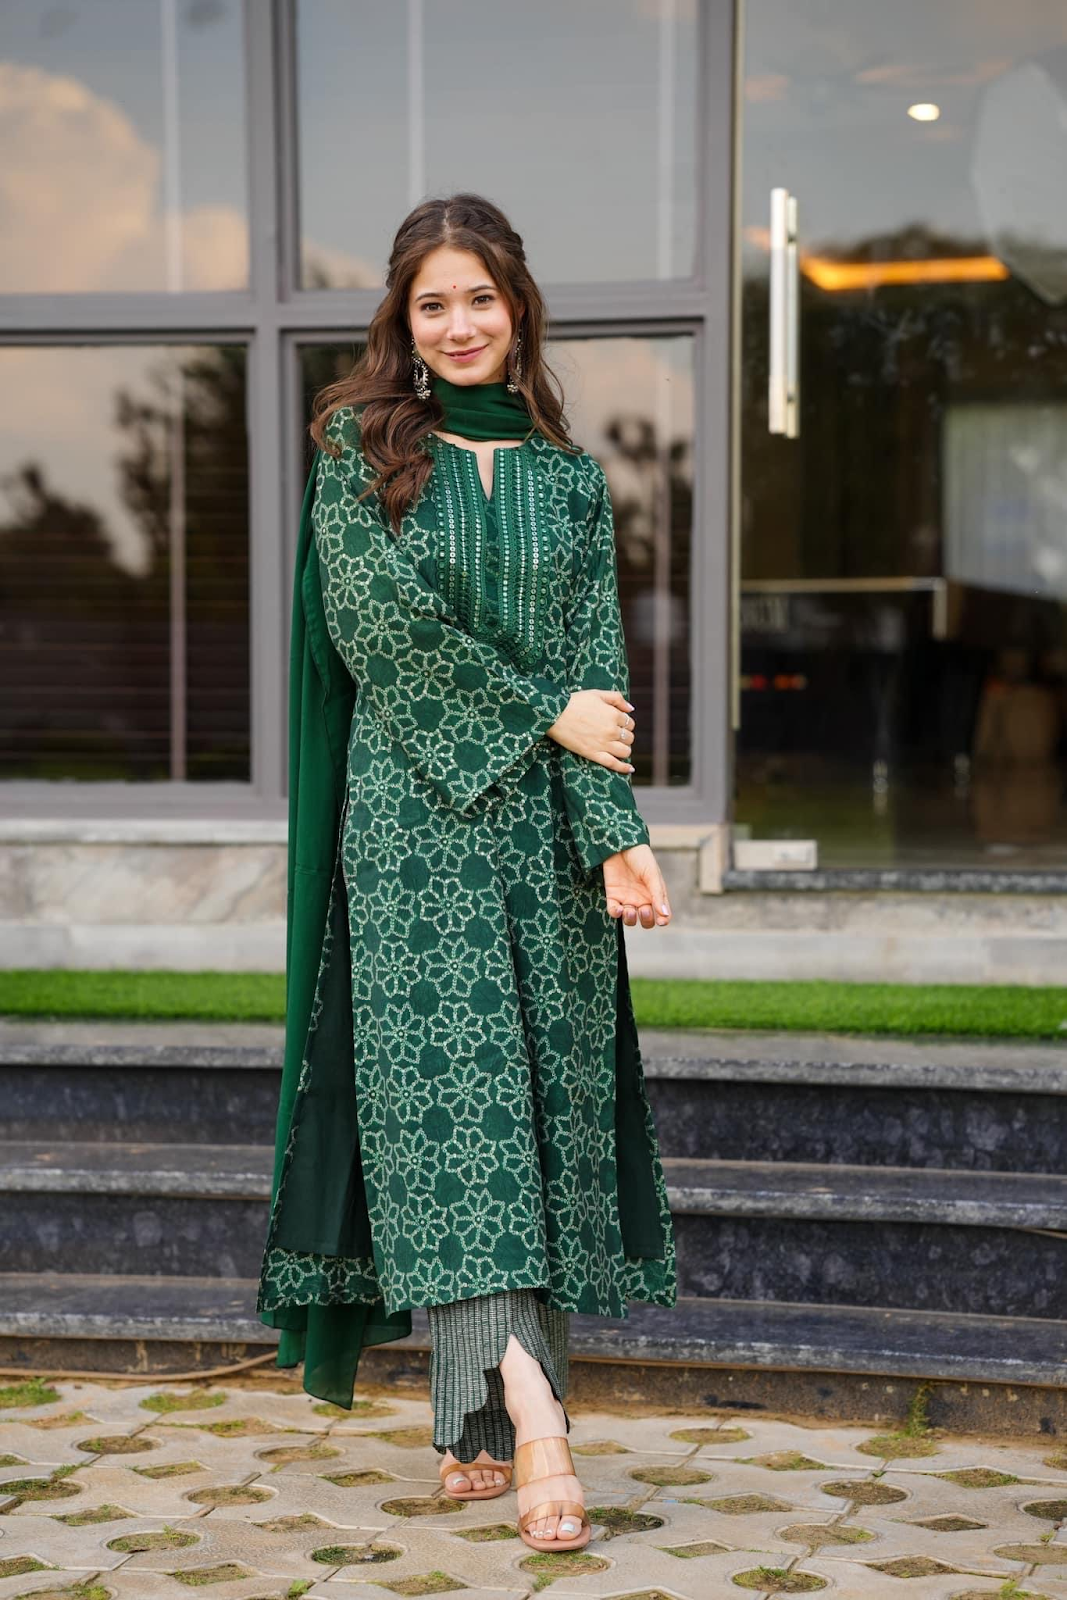 Ethnic wear from clothing stores